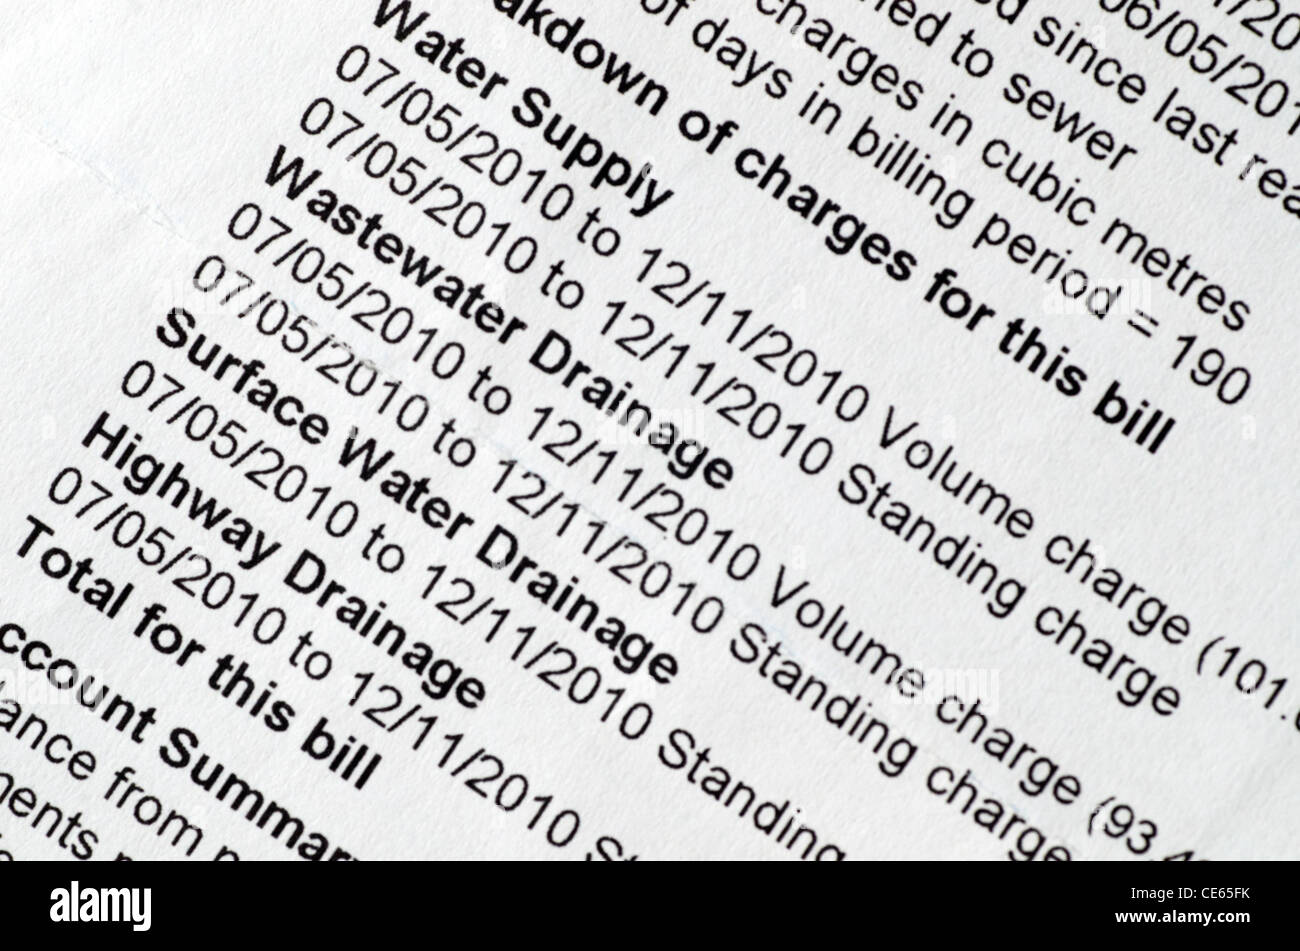 Water bill showing services charged for. Stock Photo